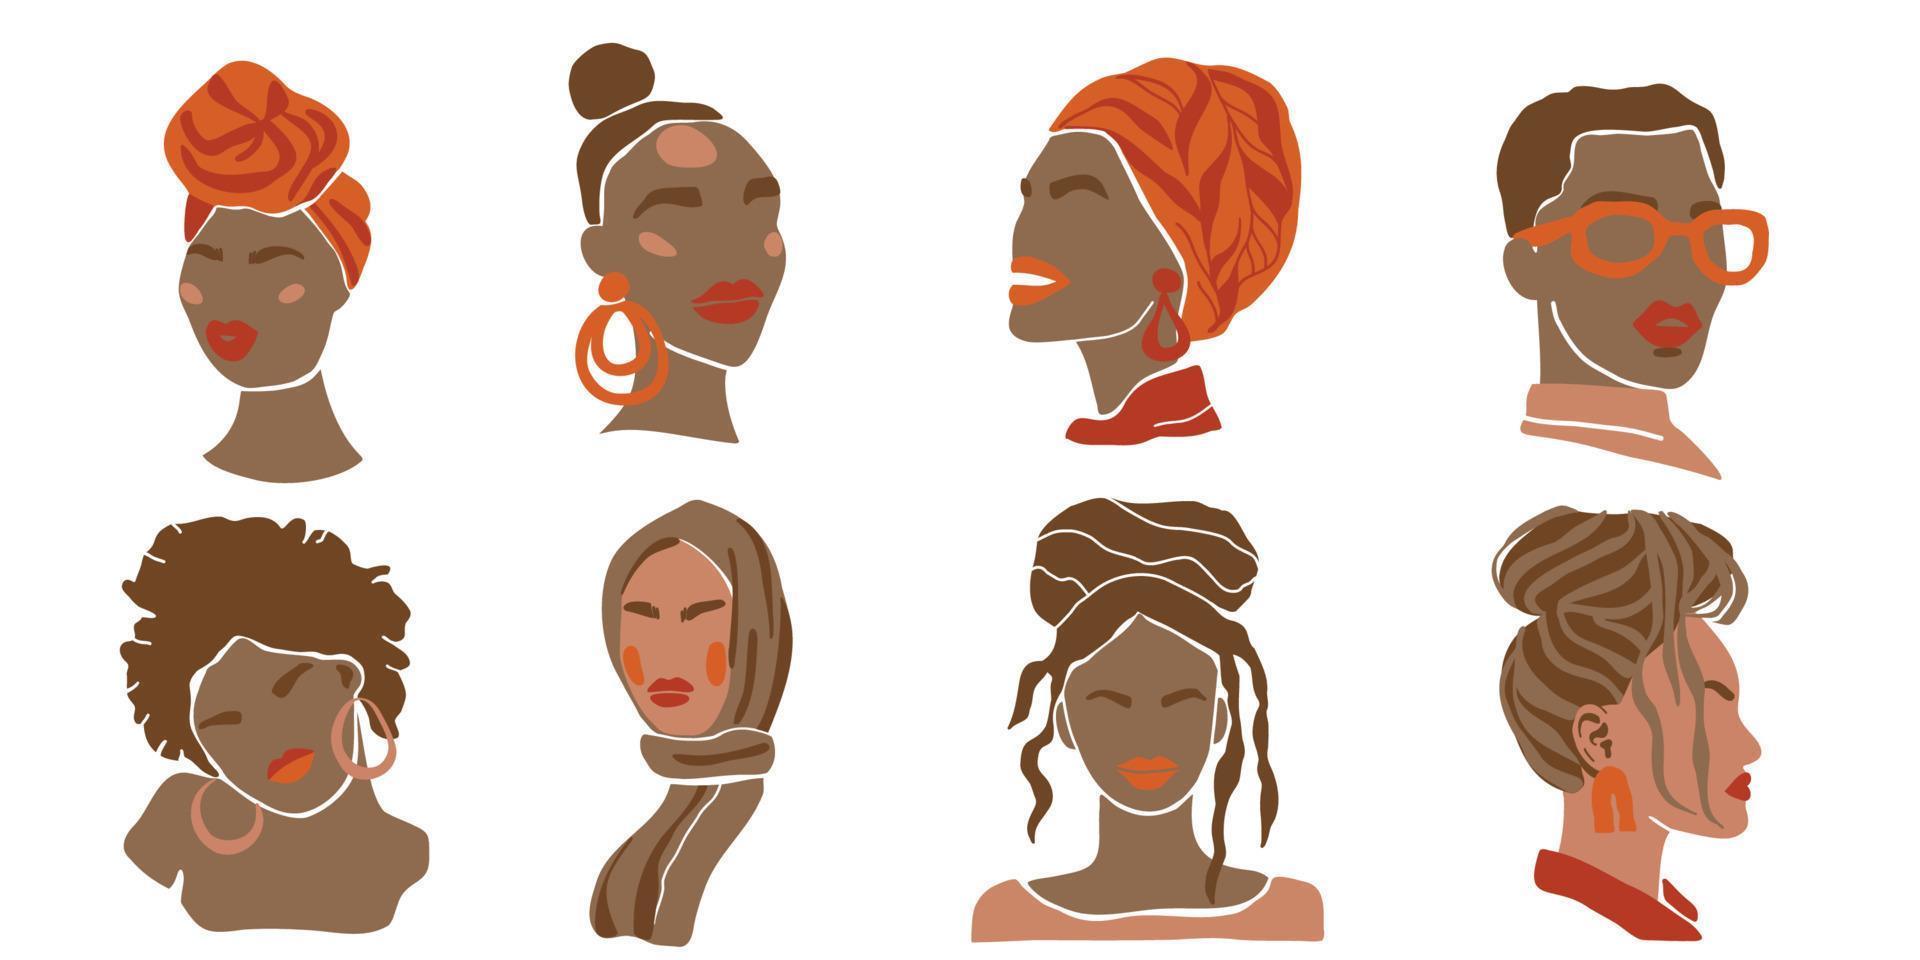 Black women aesthetic portrait set. Hand drawn vector illustration in abstract minimal style